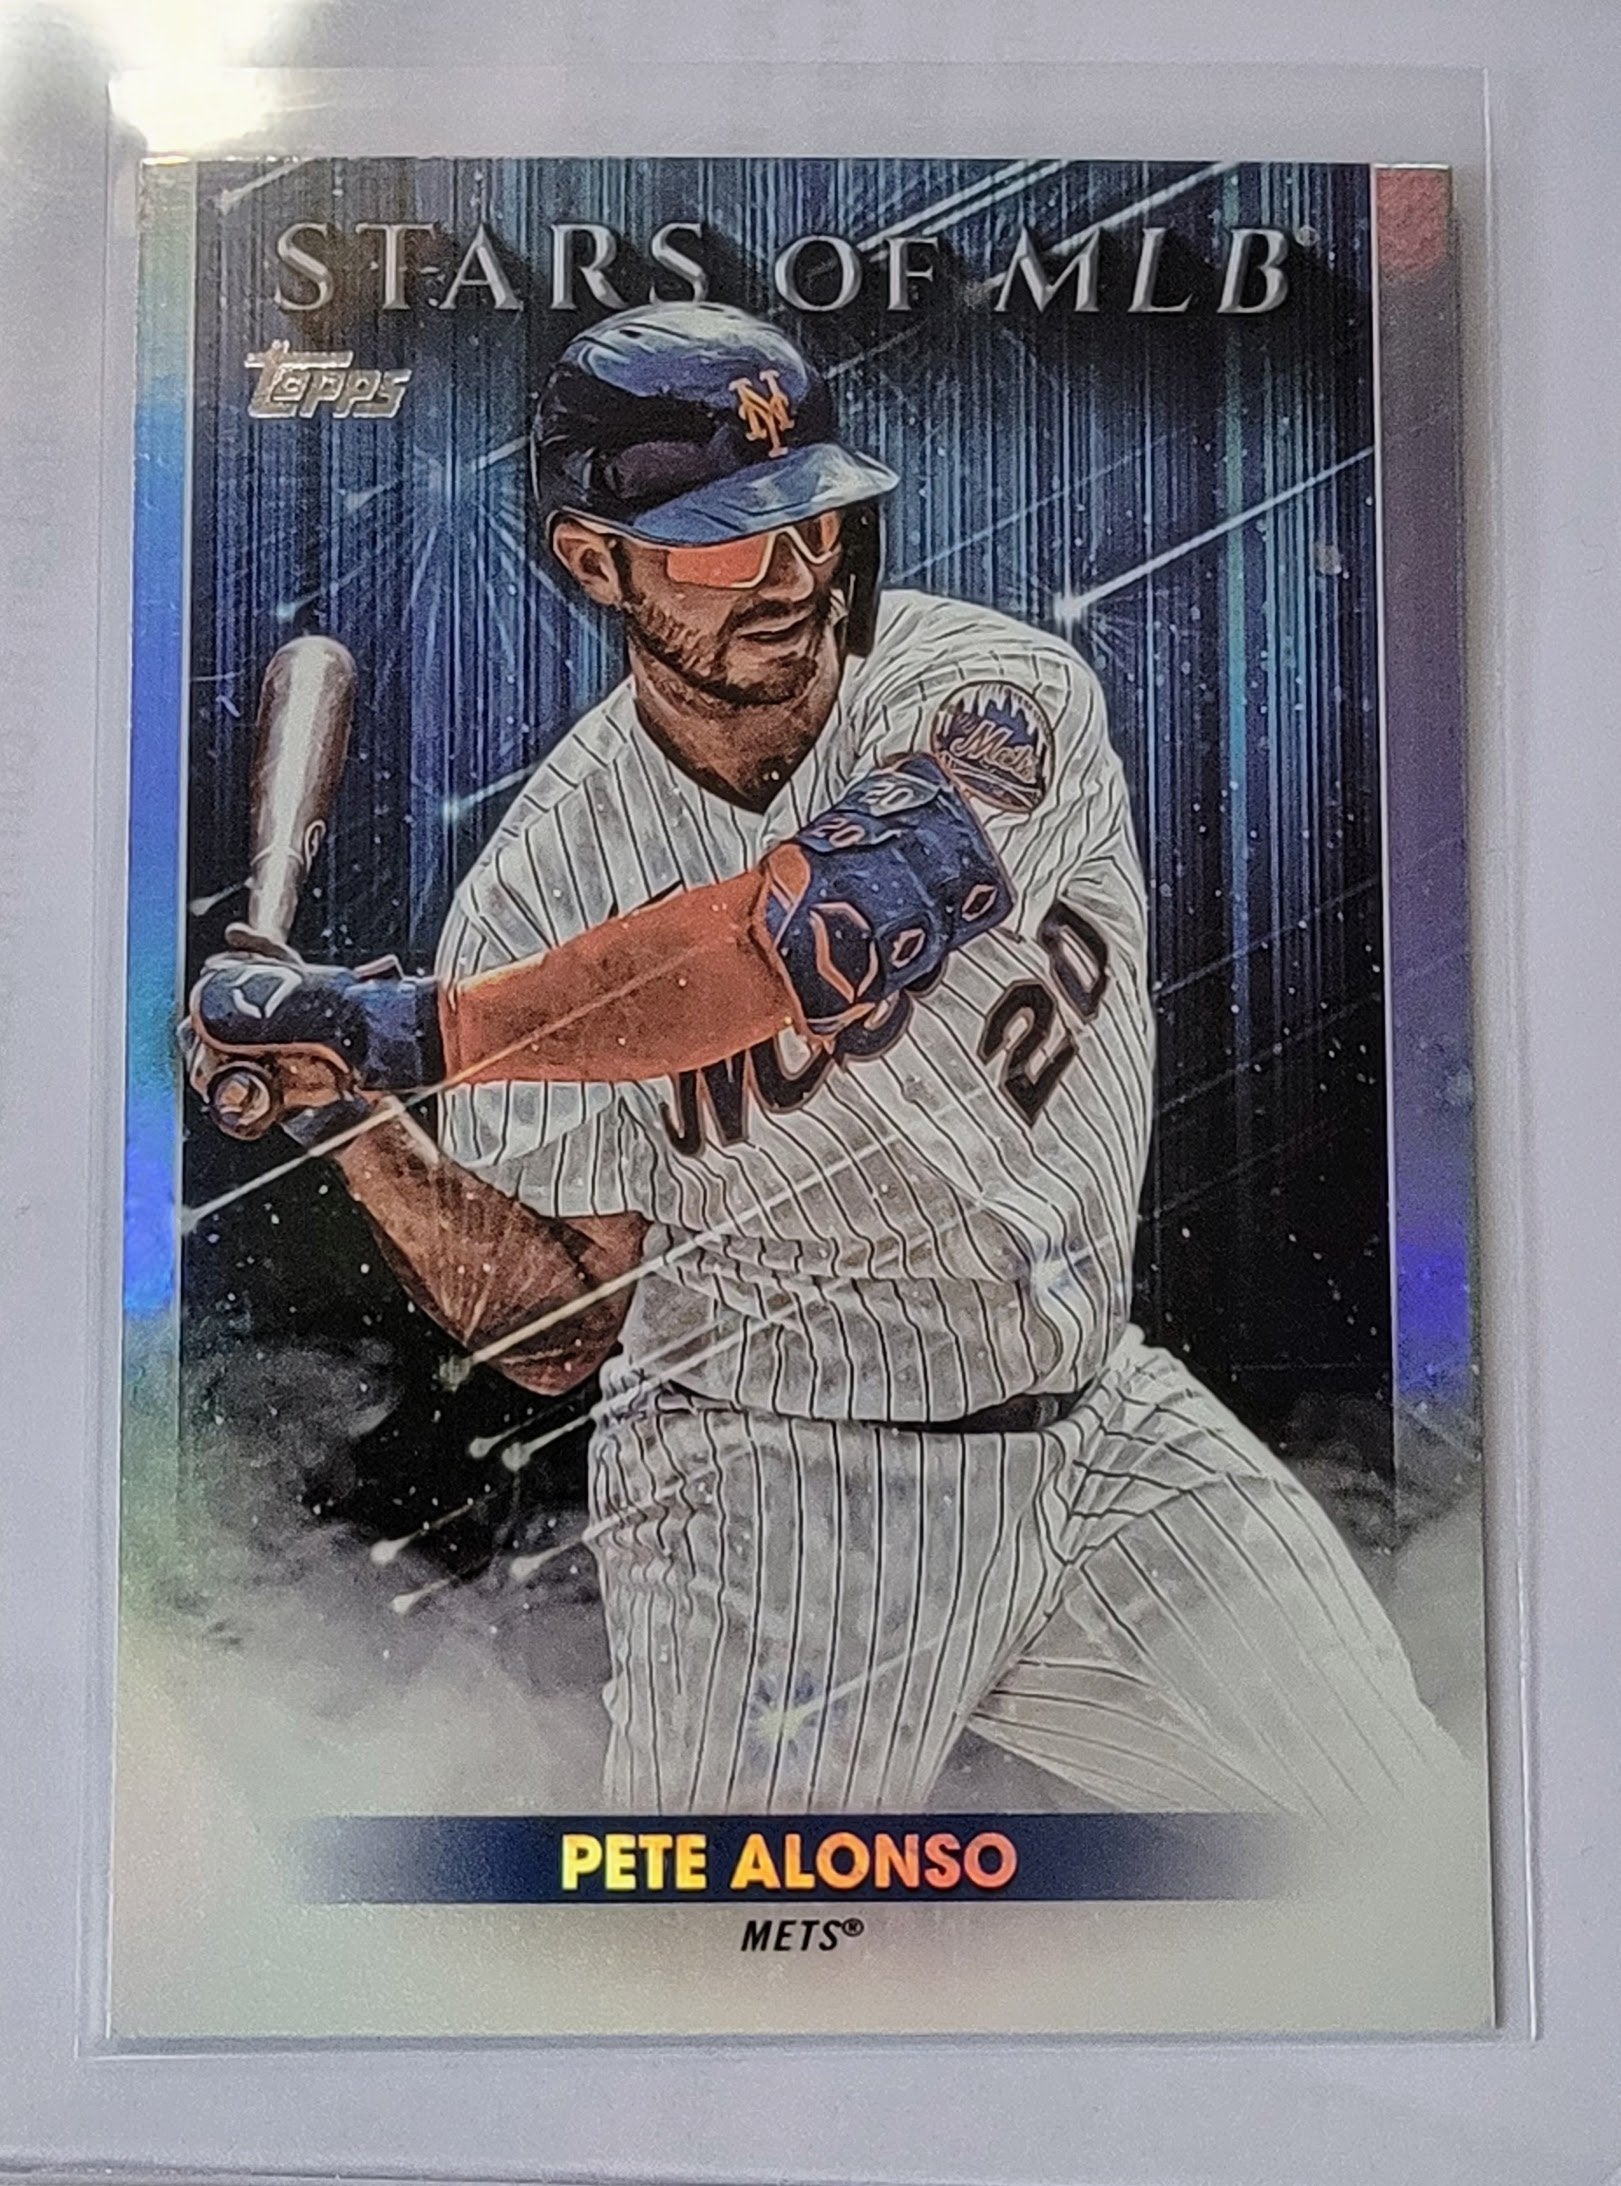 2022 Topps Pete Alonso Stars of the MLB Baseball Trading Card GRB1 simple Xclusive Collectibles   